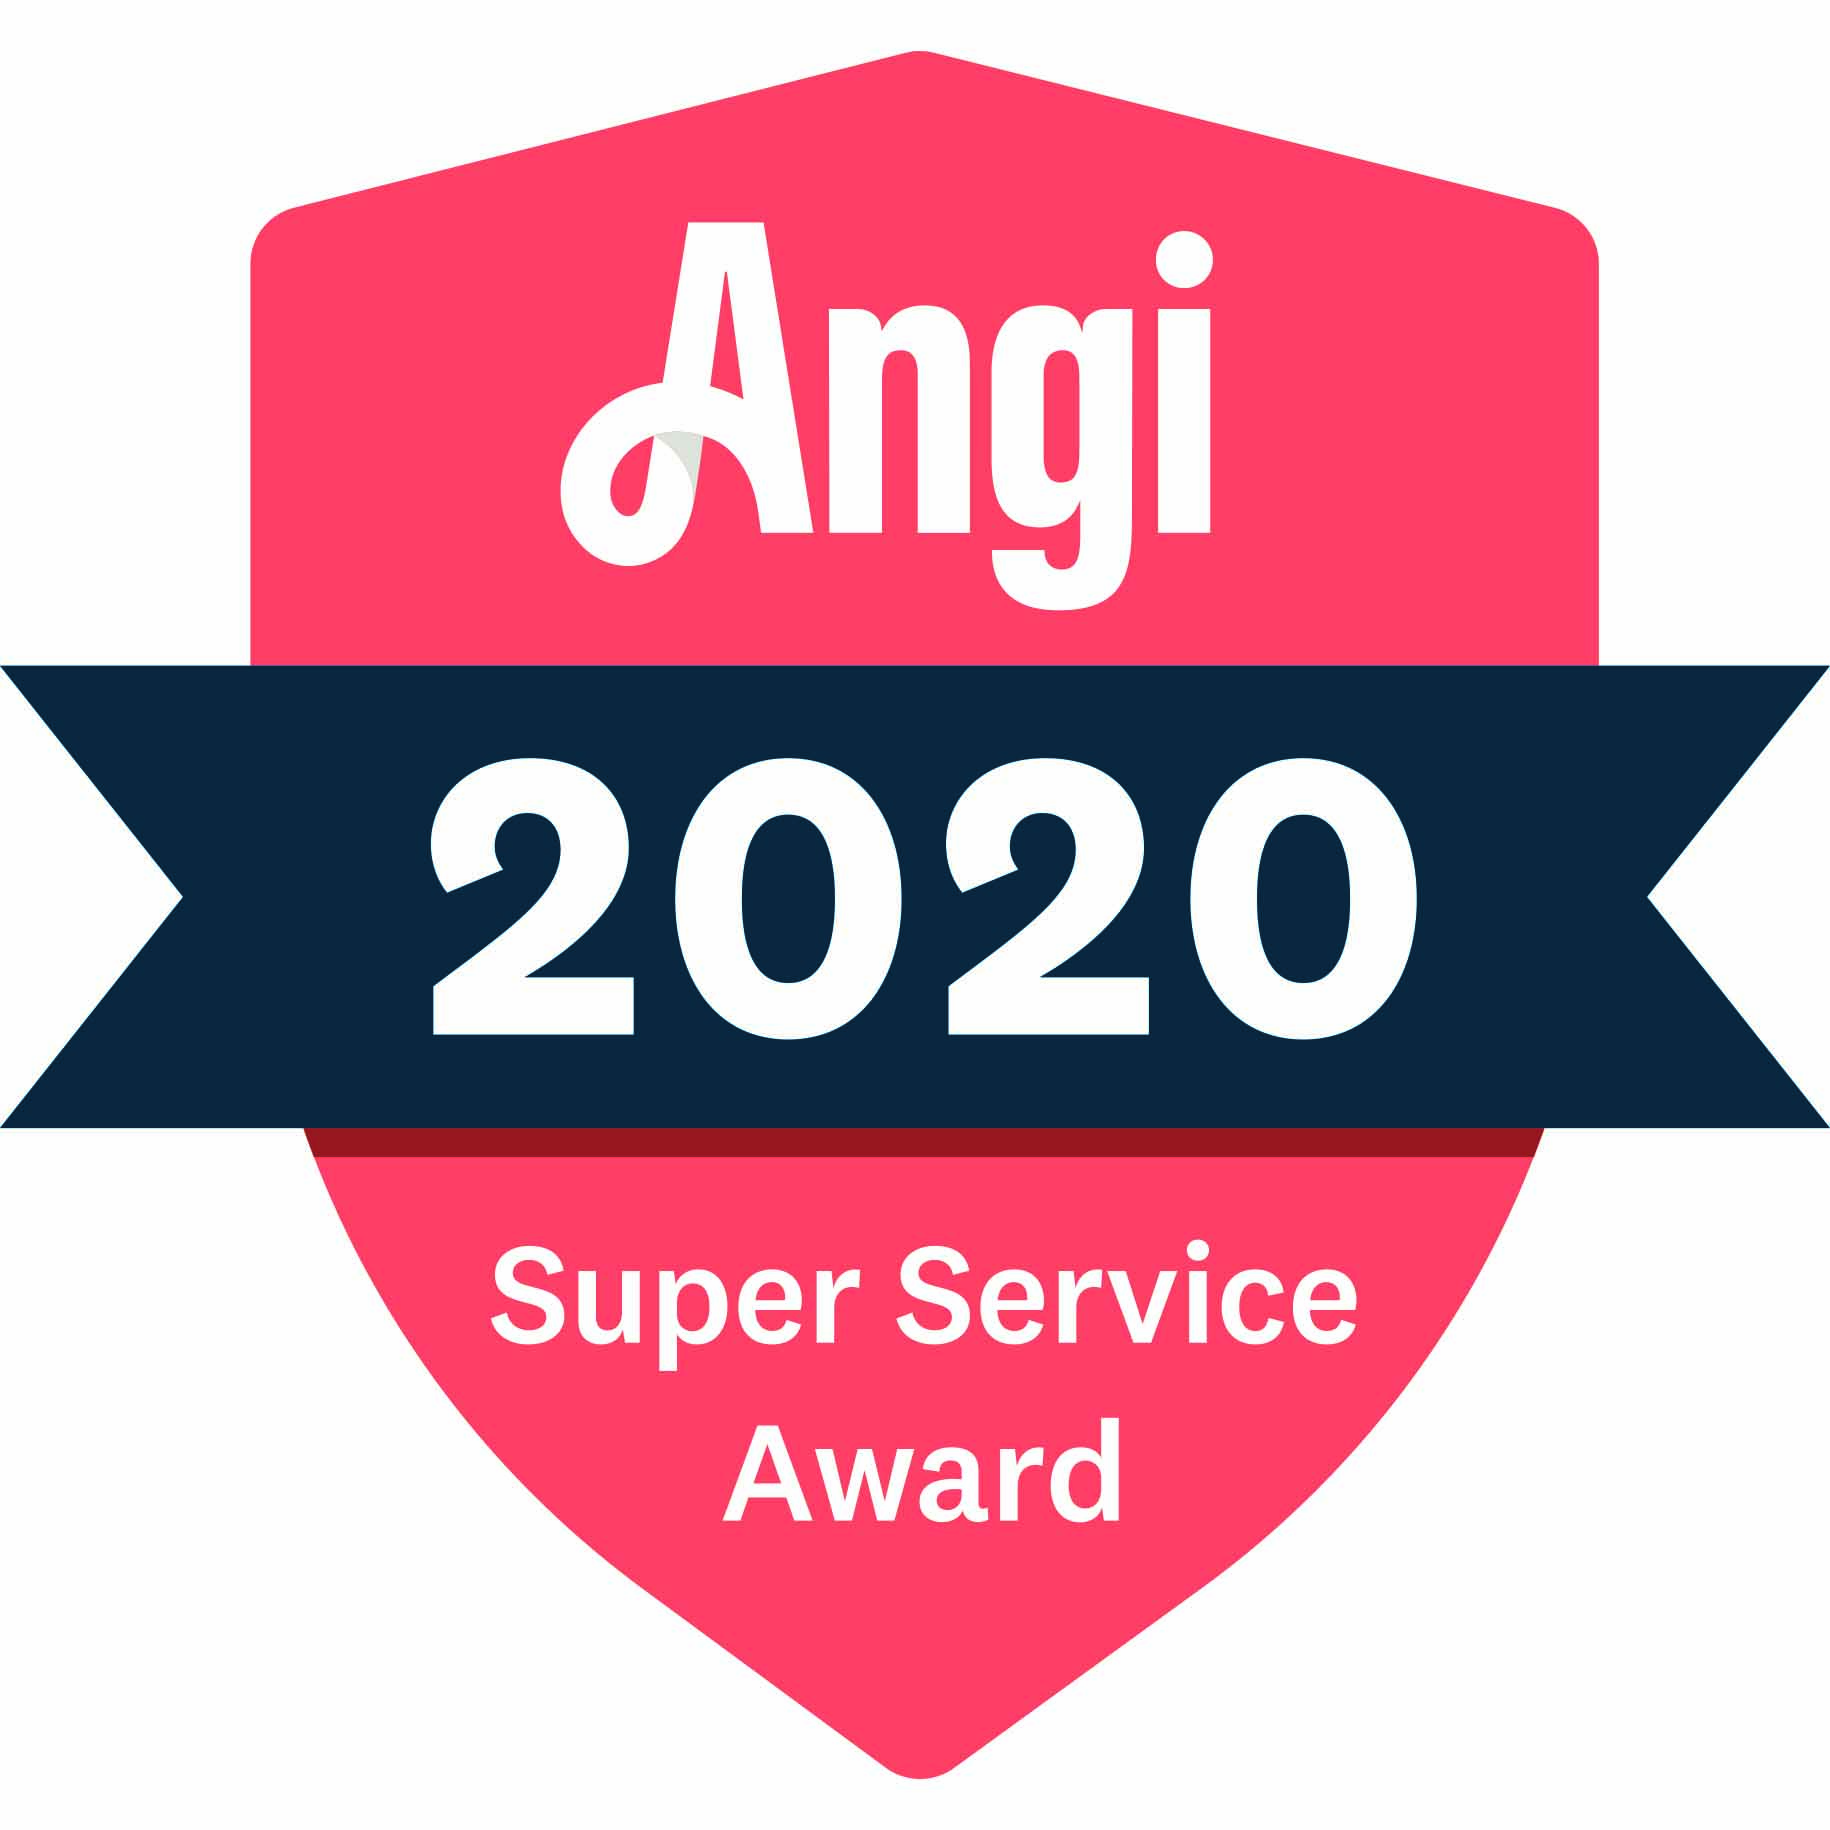 Best Service Heating & Cooling Earns 2018 Angie’s List Super Service Award